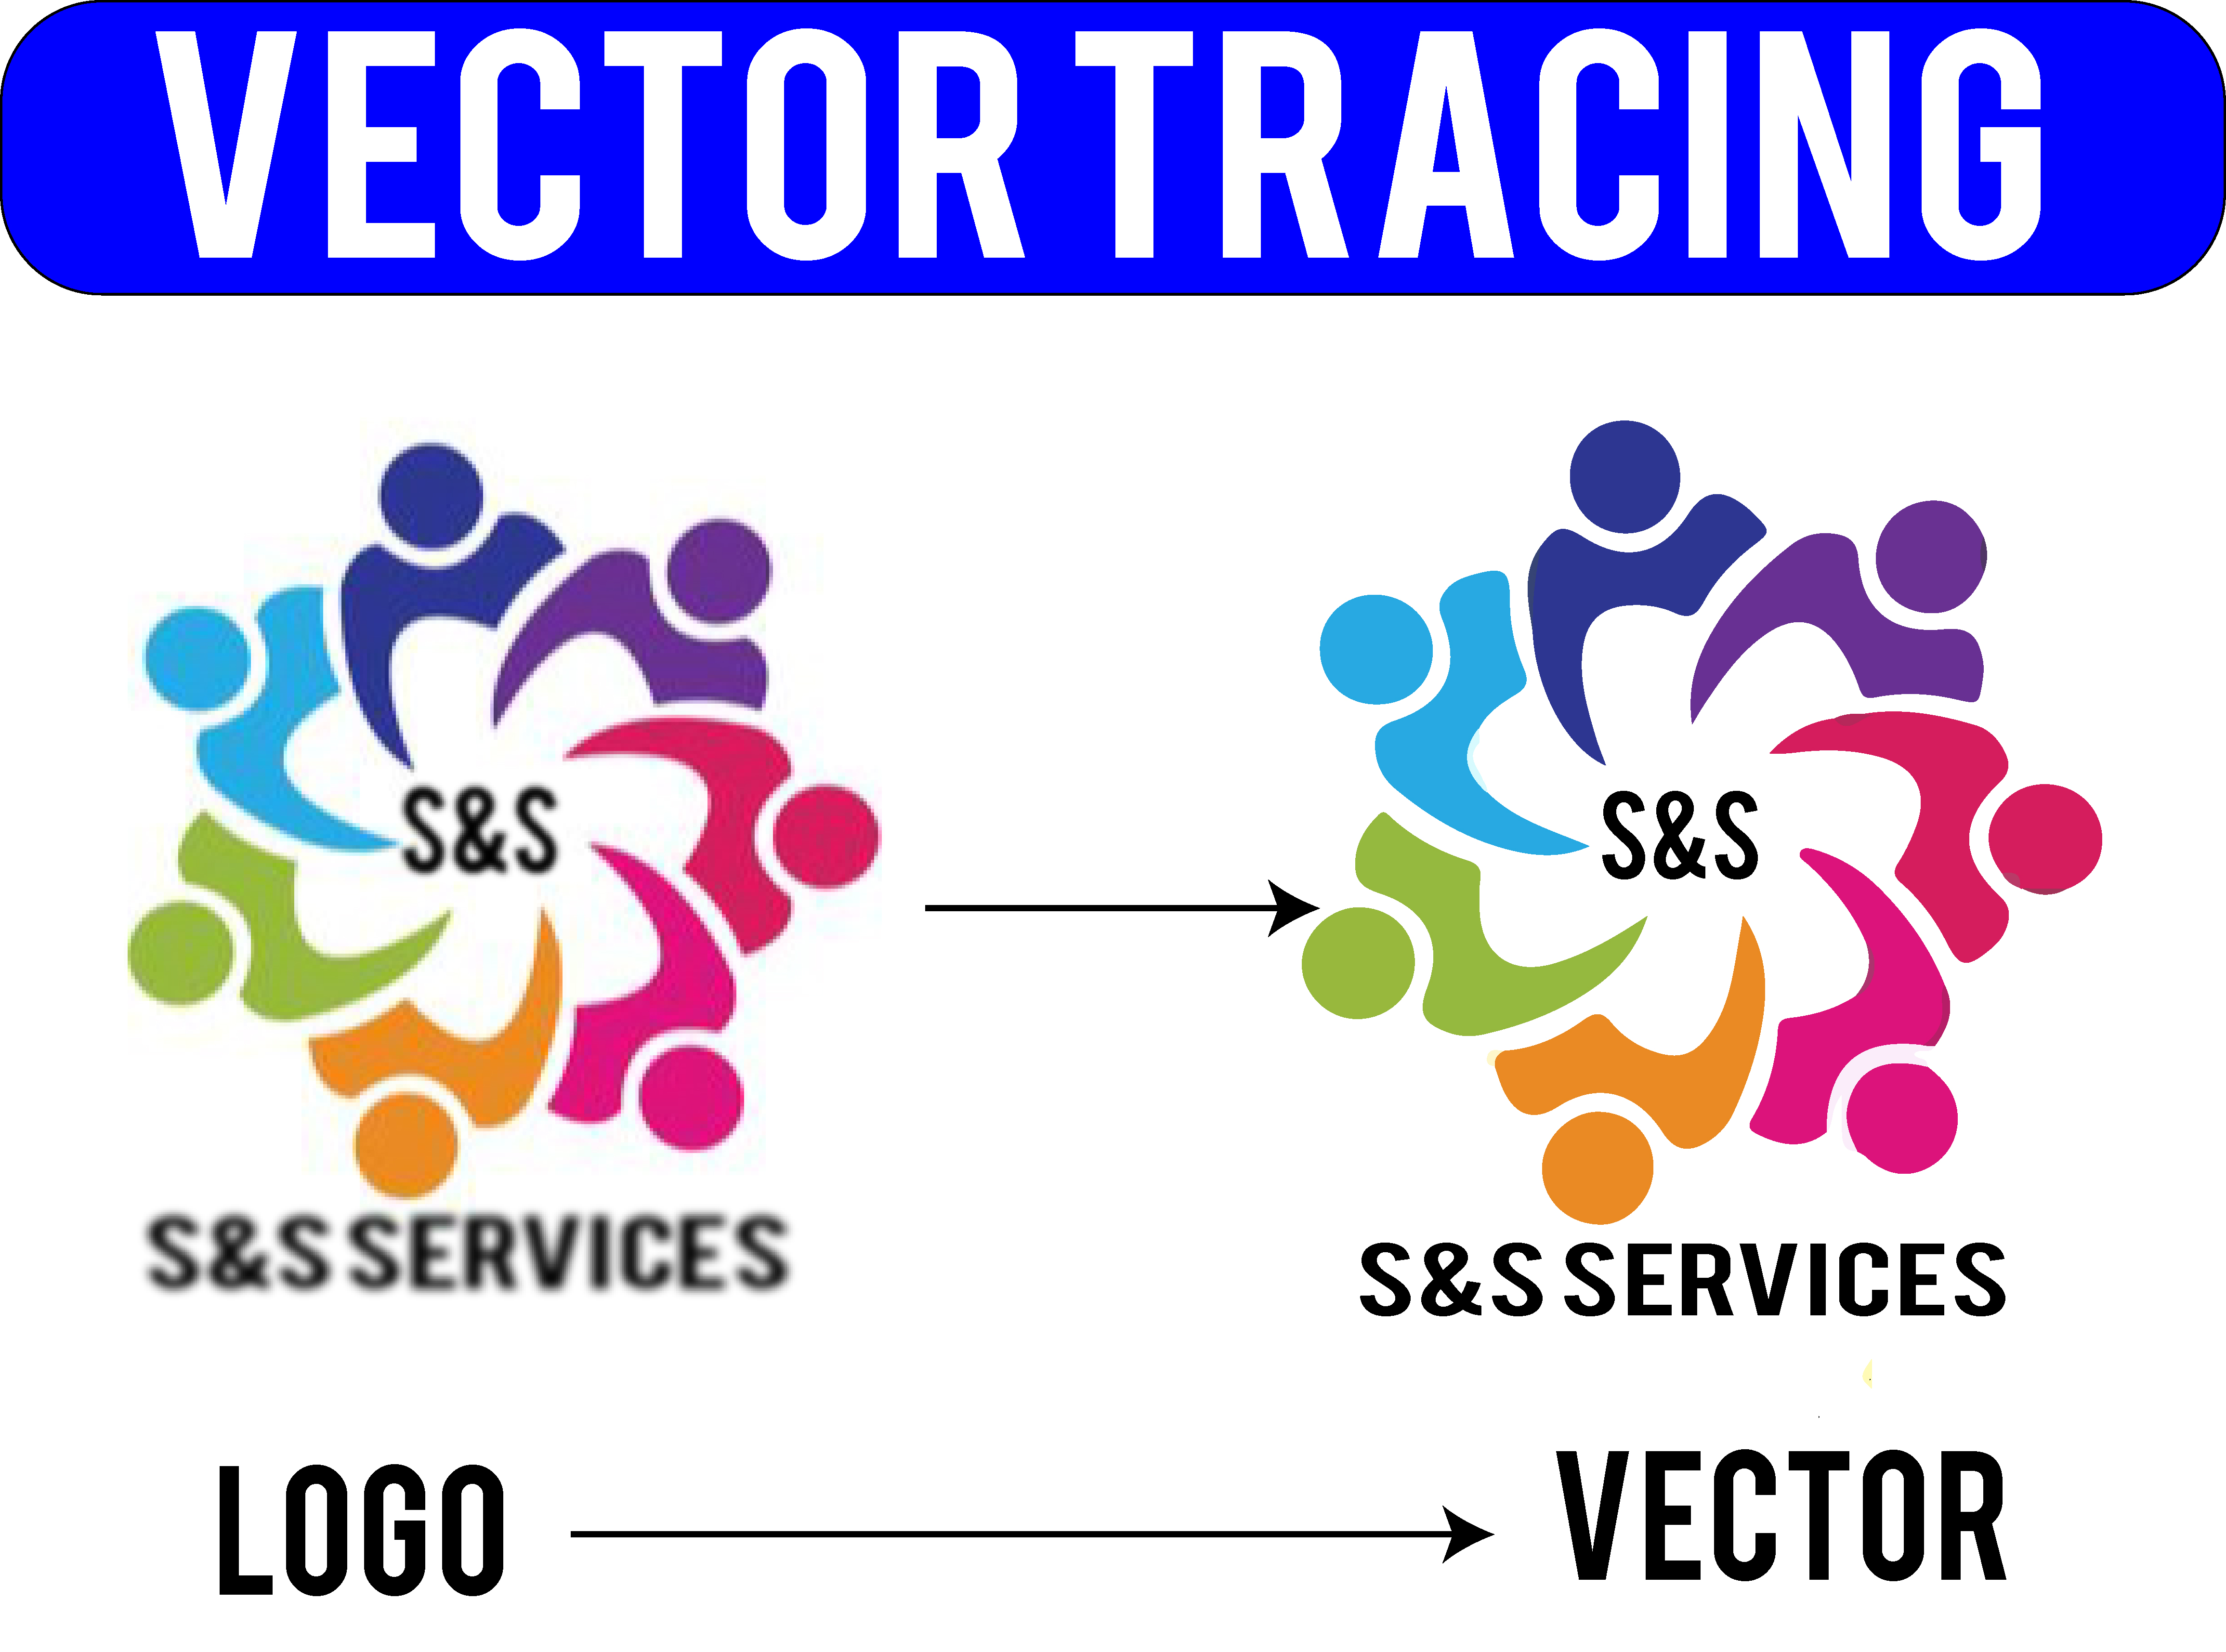 Vector Tracing On Image Or Logo, Vector Trace, Redesign, Vectorise for